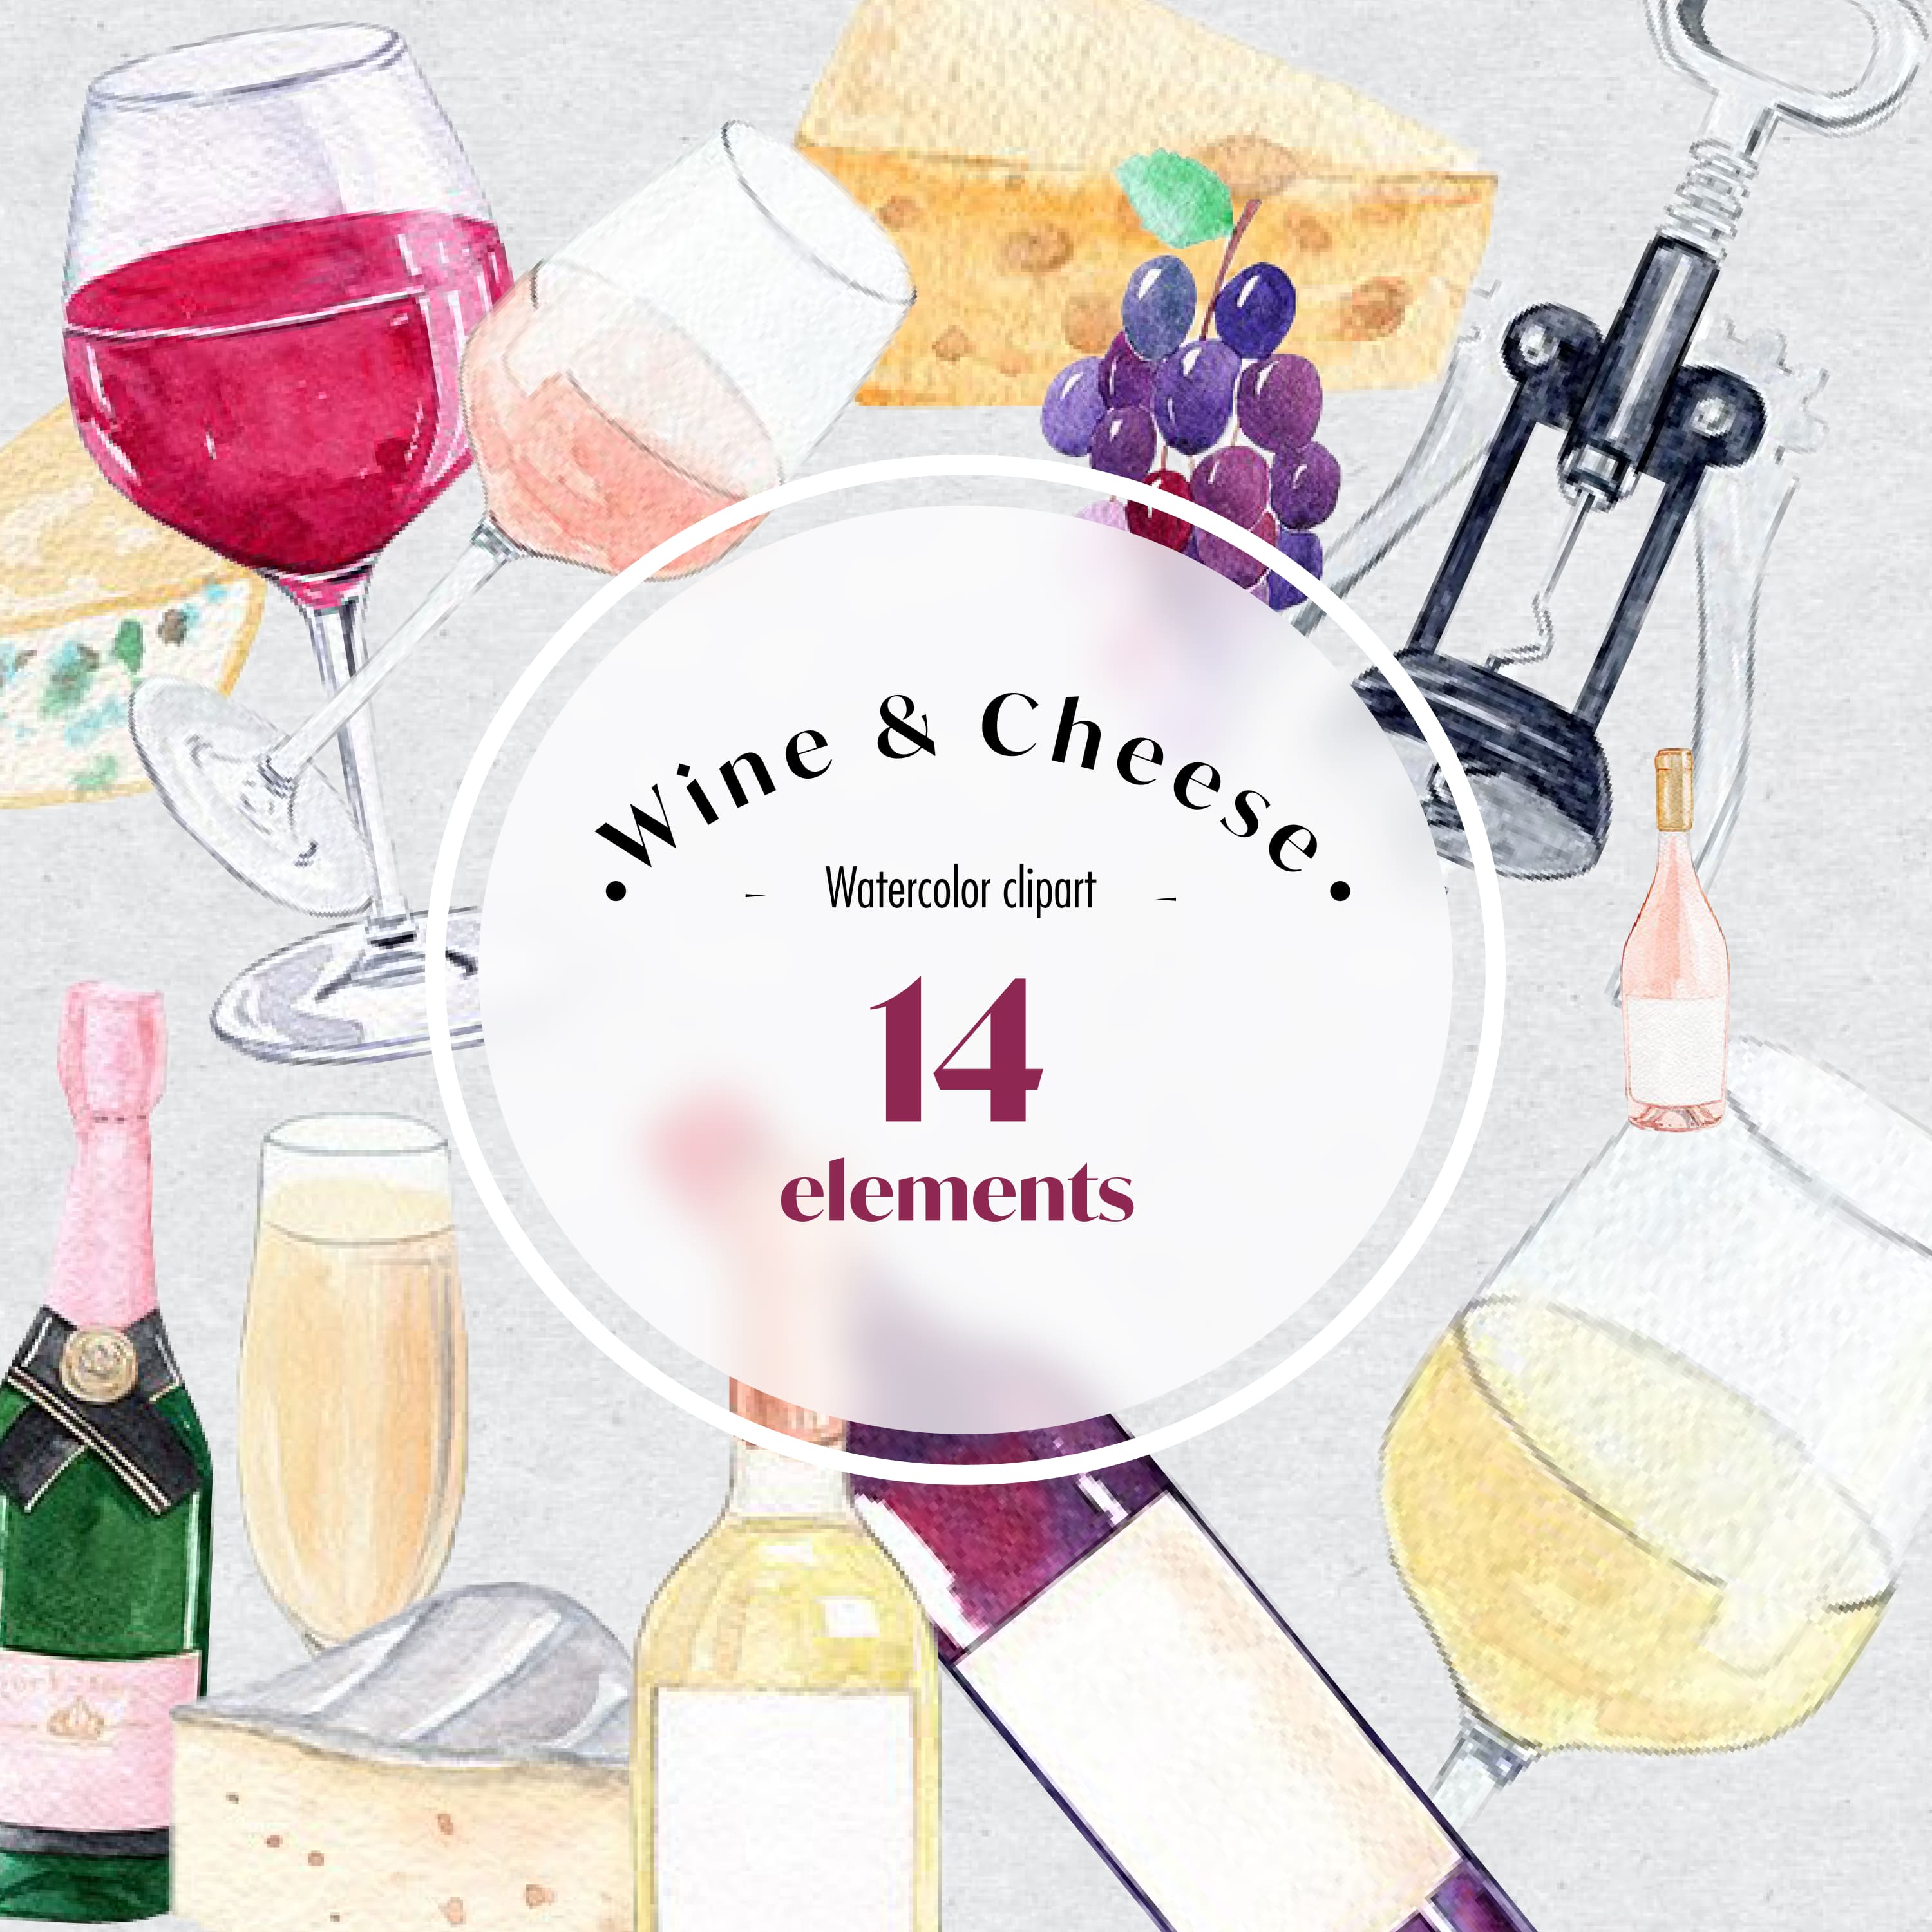 Cover of gorgeous images of french cheeses and wine.